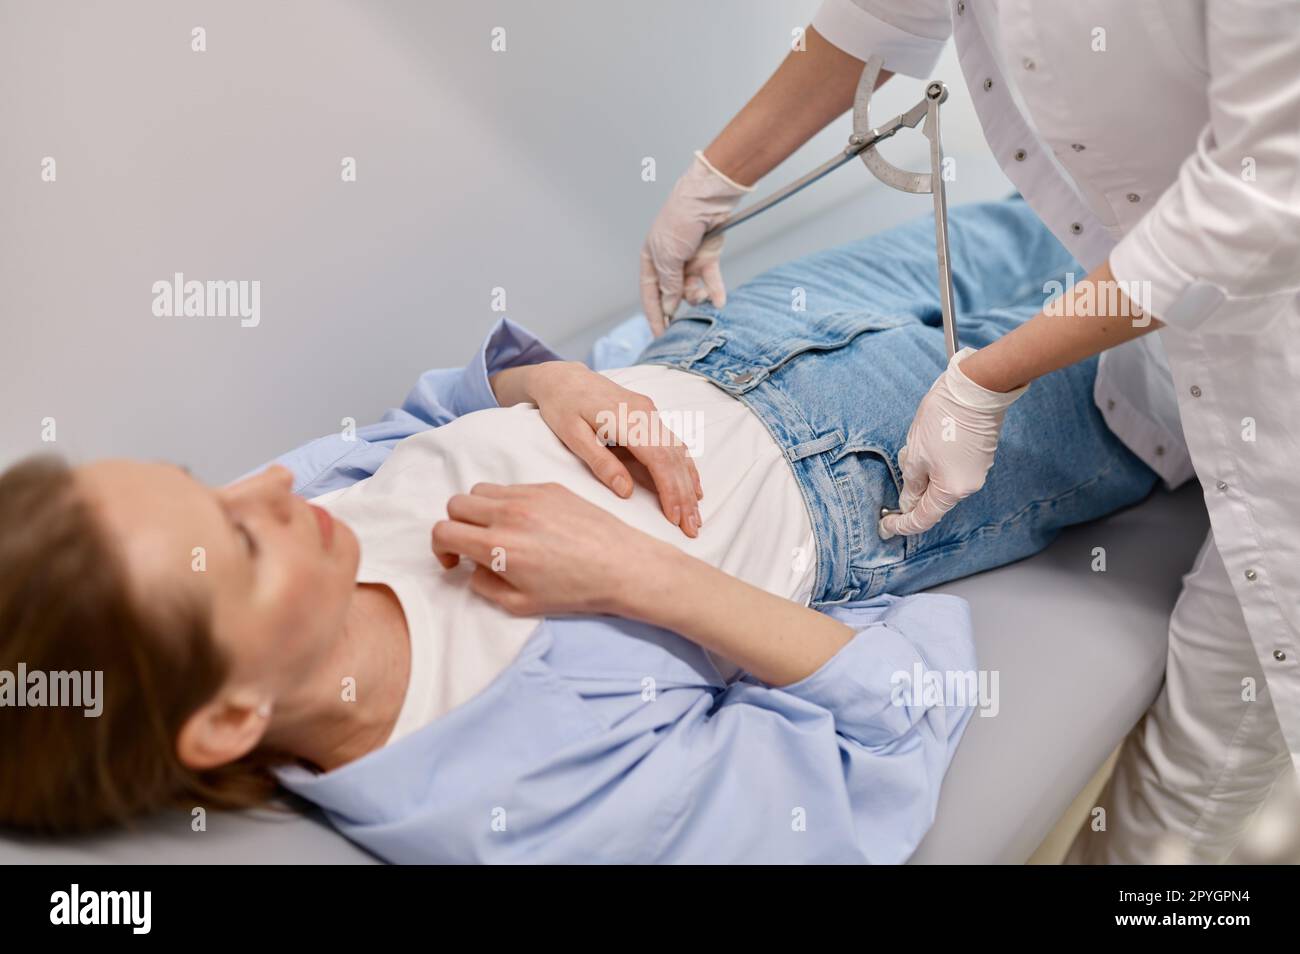 Gynecologist doctor measuring female patient hip volume during checkup Stock Photo